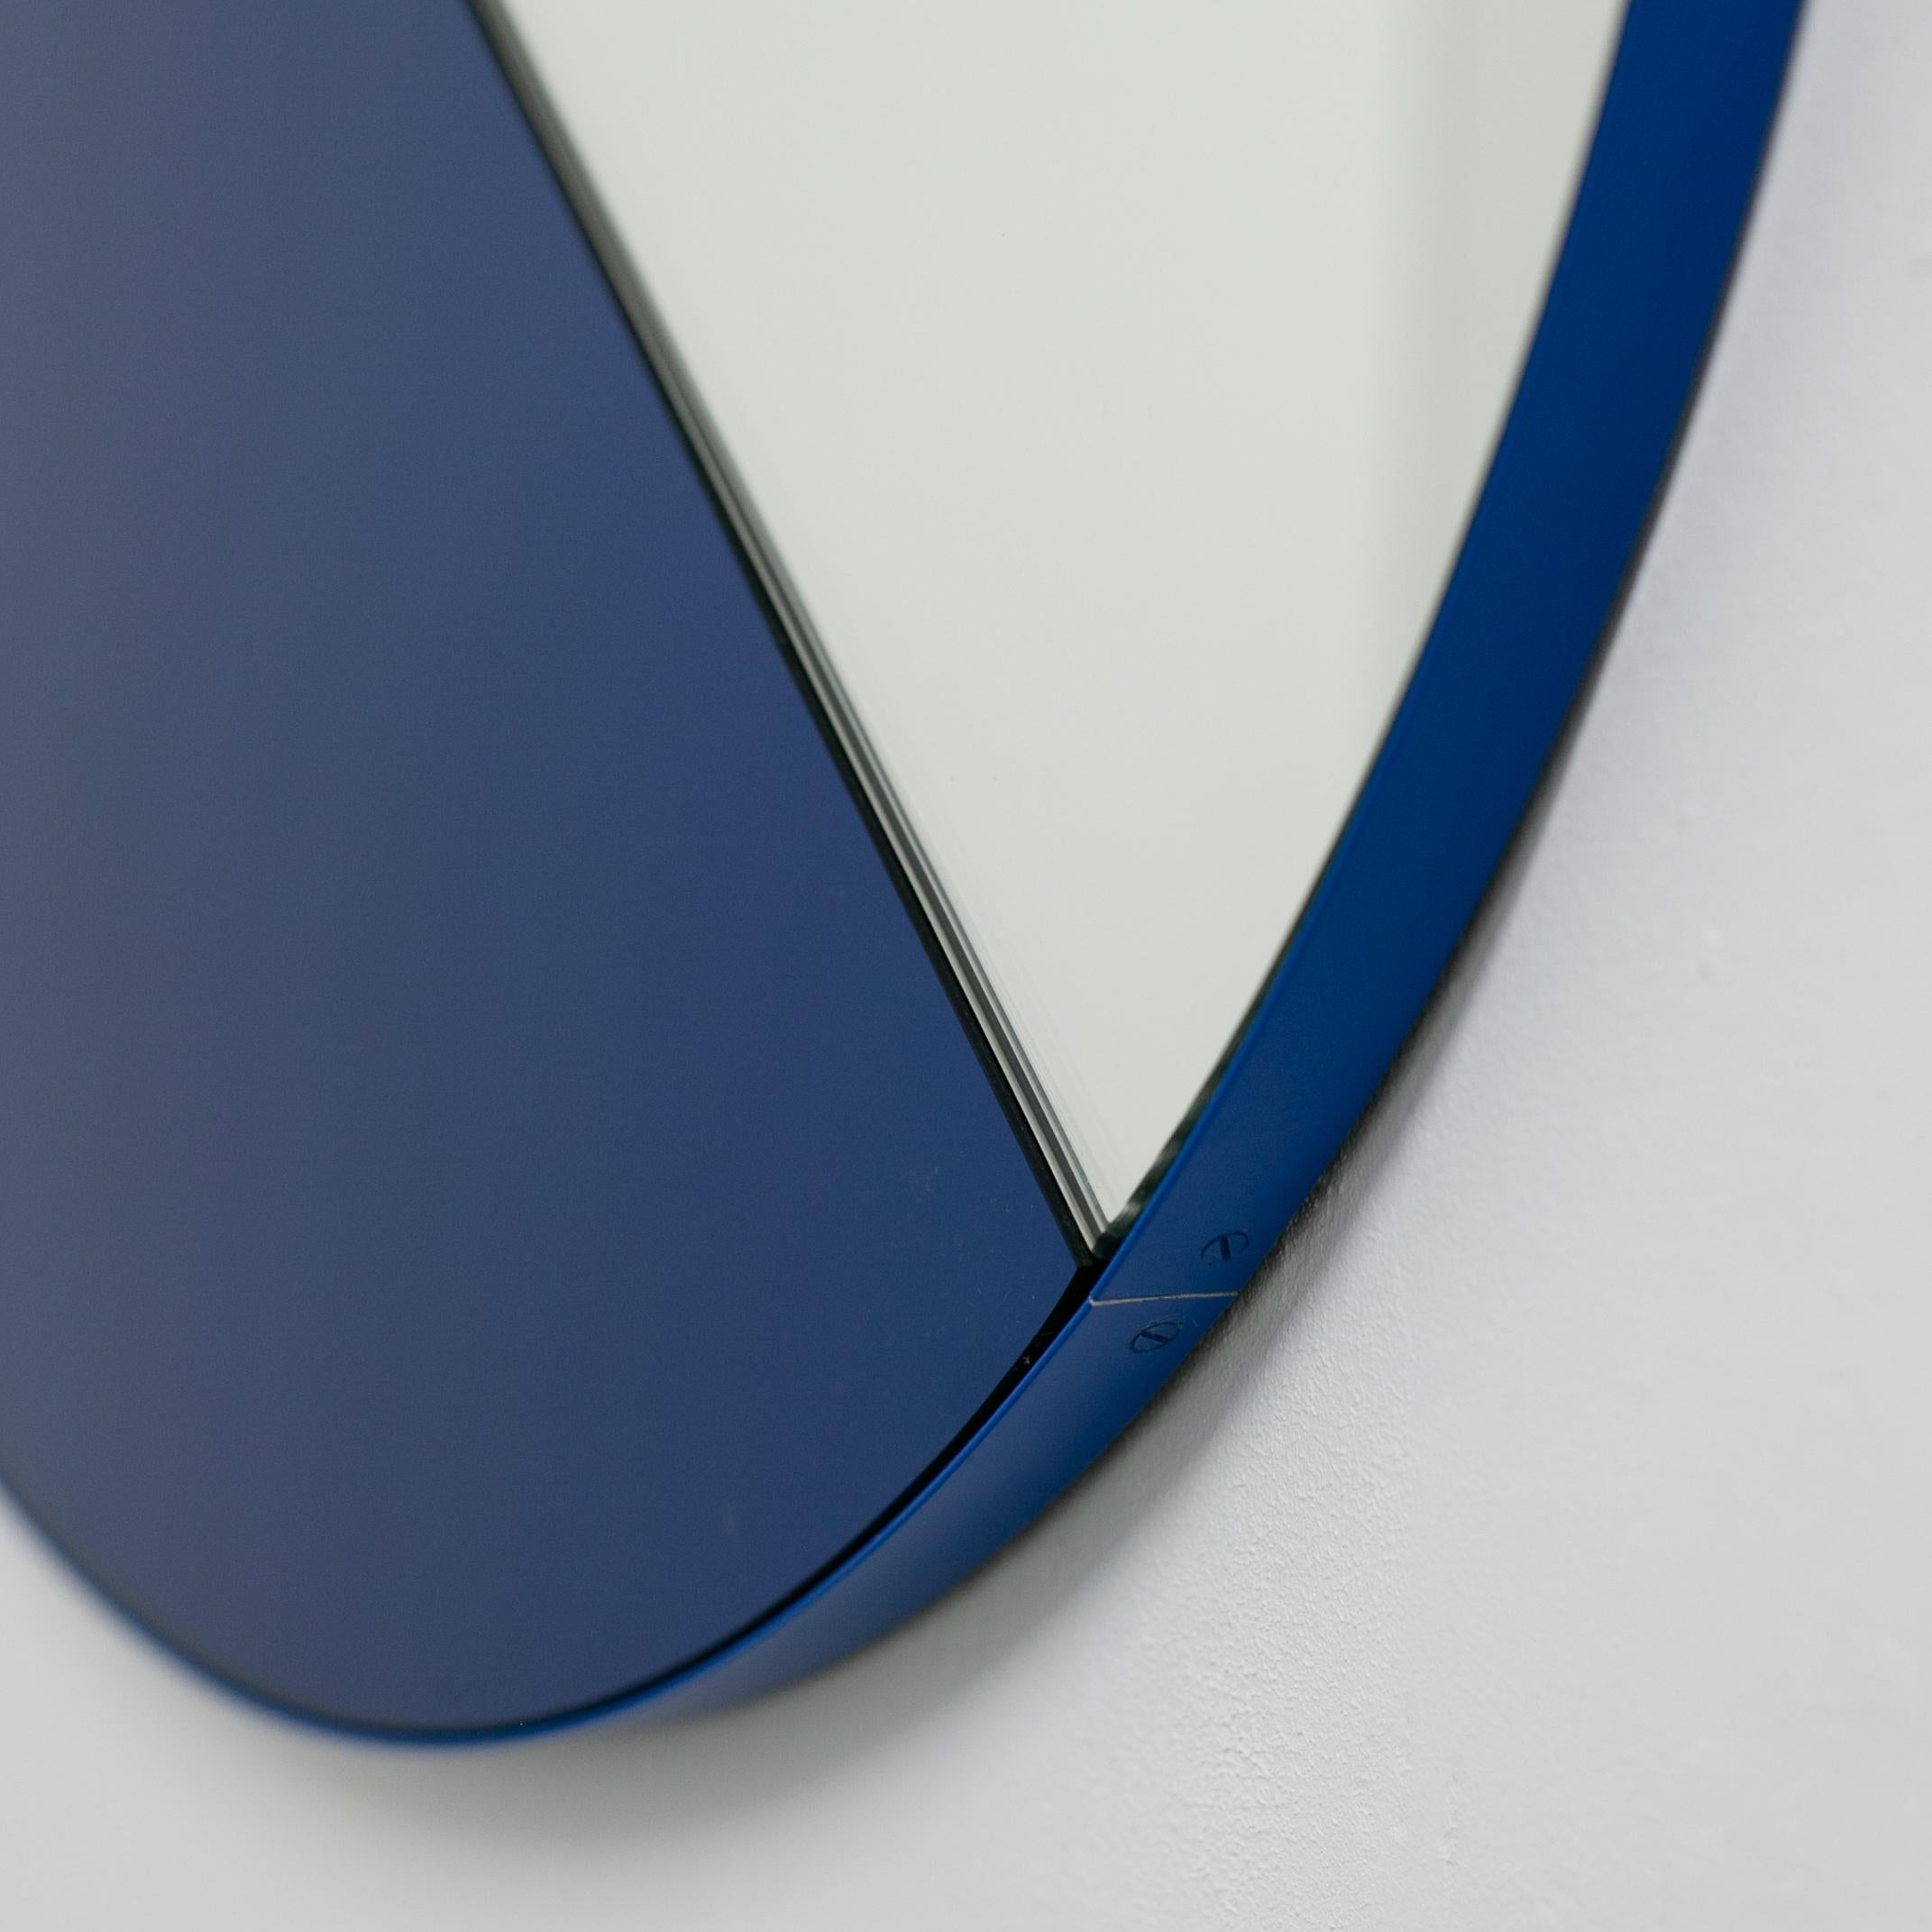 Orbis Dualis Contemporary Blue and Silver Round Mirror with Blue Frame, Large For Sale 3